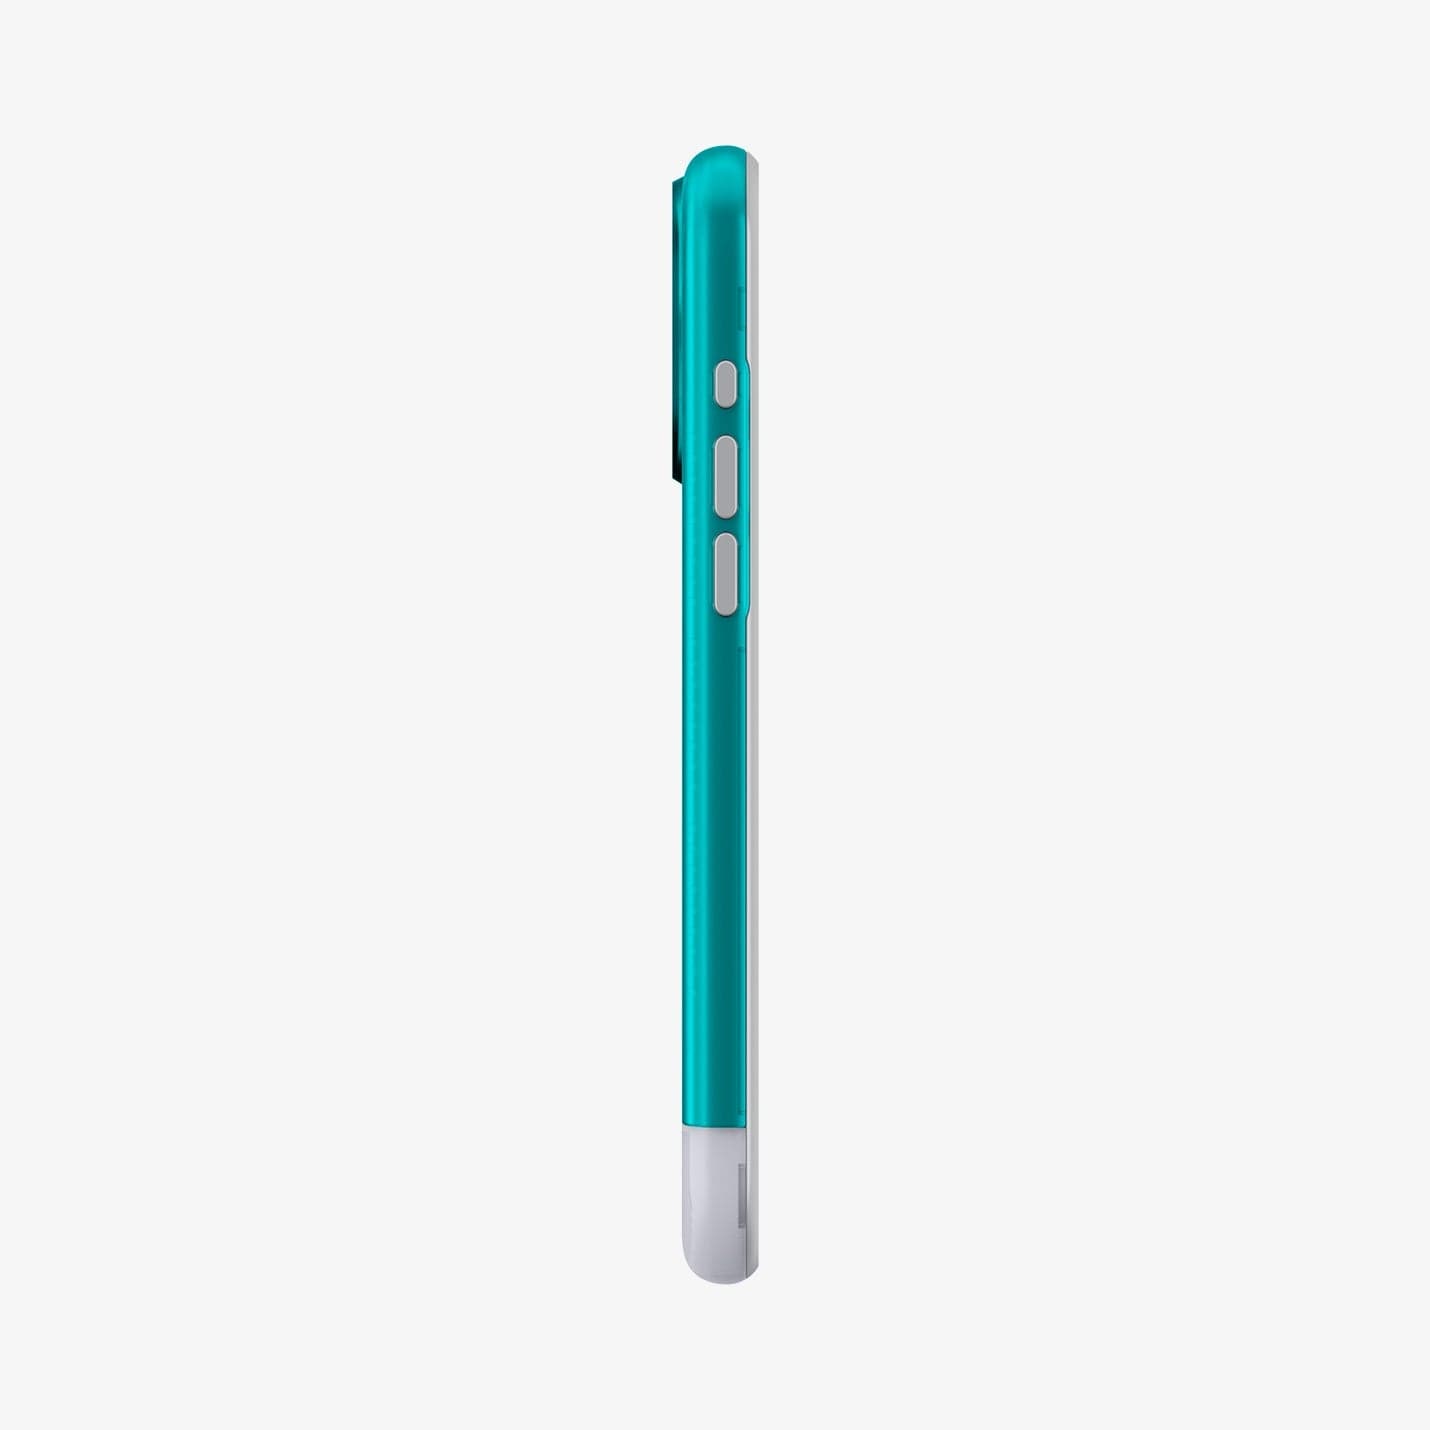 ACS06608 - iPhone 15 Pro Max Case Classic C1 (MagFit) in bondi blue showing the side with volume controls